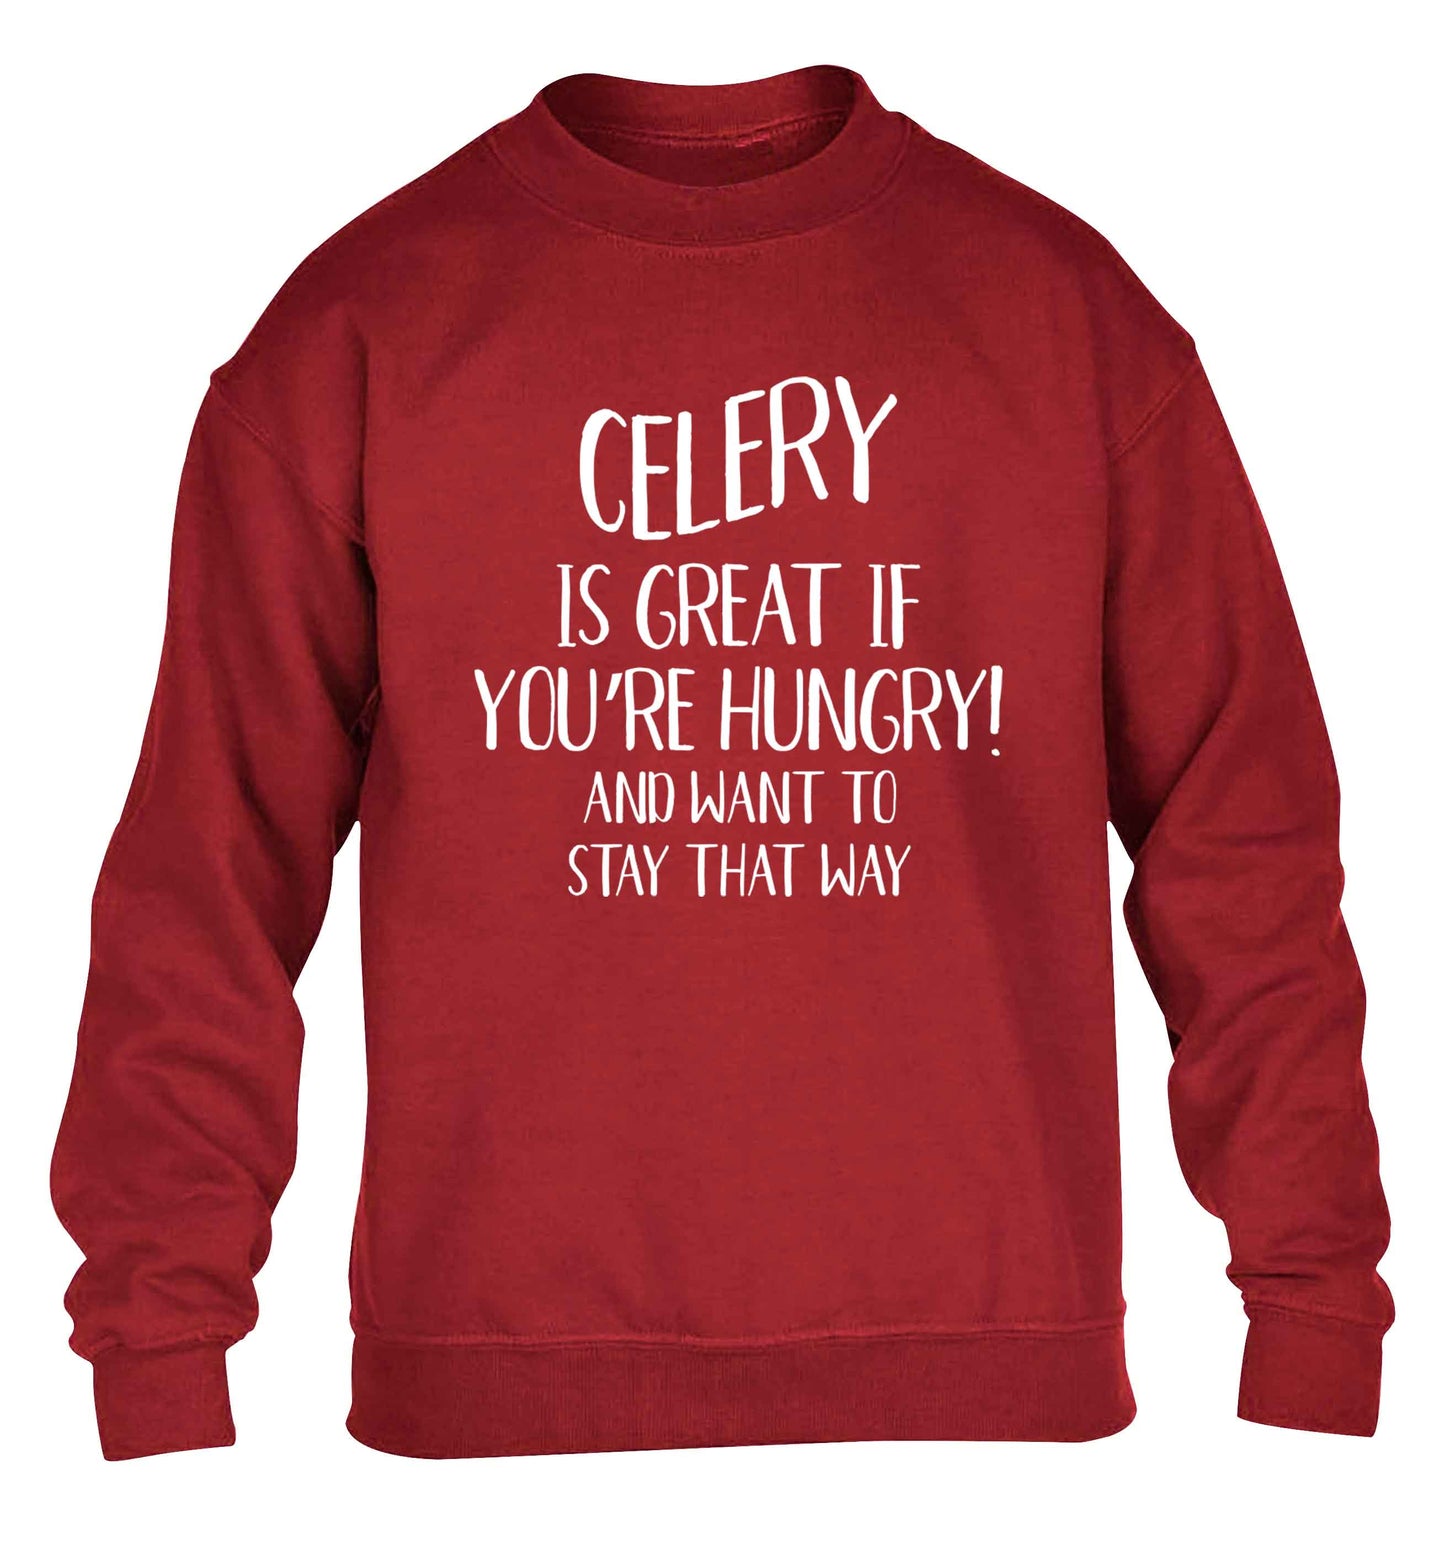 Cellery is great when you're hungry and want to stay that way children's grey sweater 12-13 Years